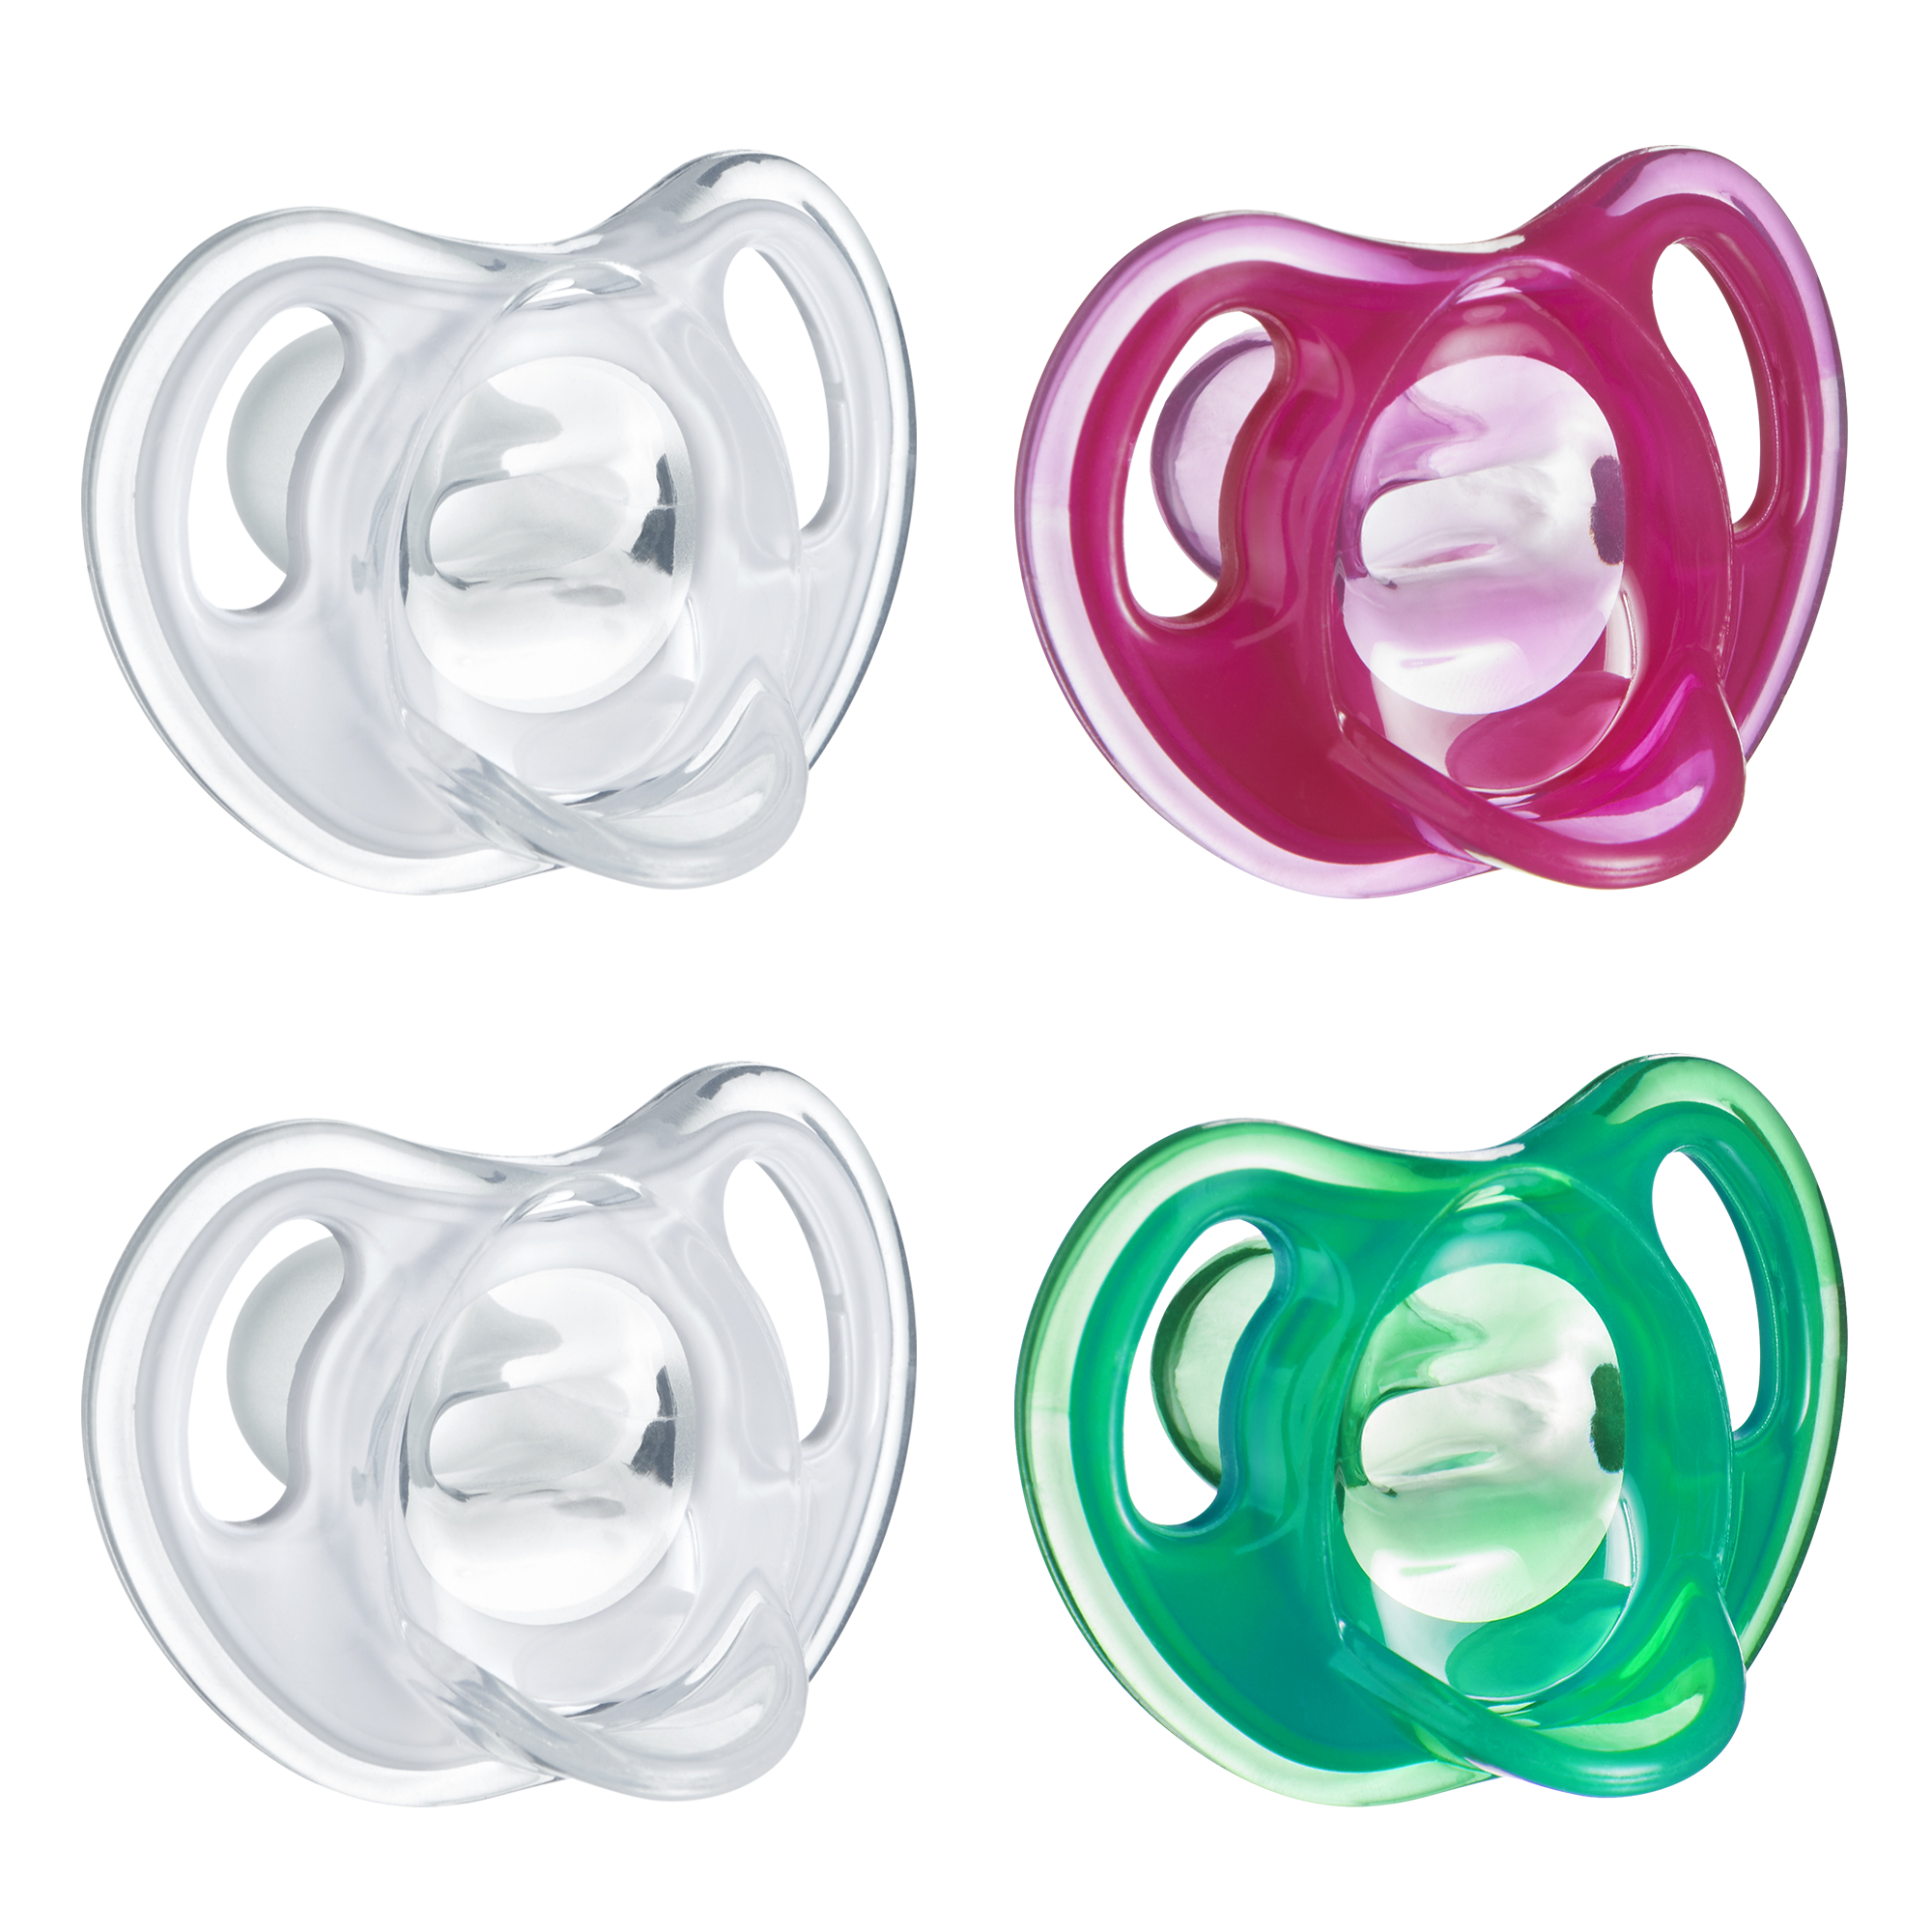 Tommee Tippee Ultra-Light Silicone Pacifier, Symmetrical One-Piece Design, BPA-Free Silicone Binkies, 18-36m, 4-Count - image 1 of 9